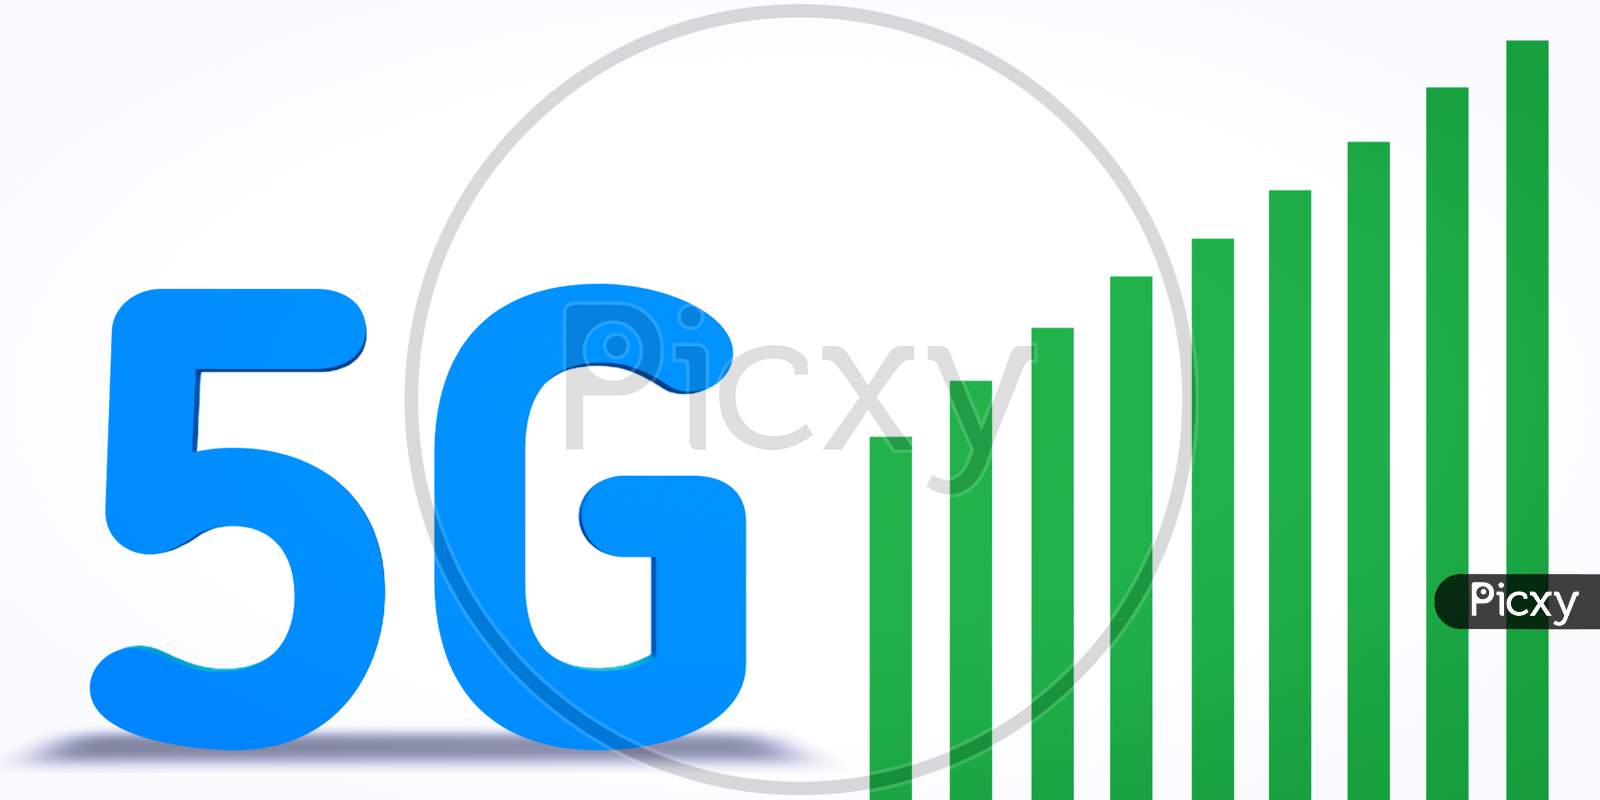 3D Rendering Blue 5G Text With Green Arrow